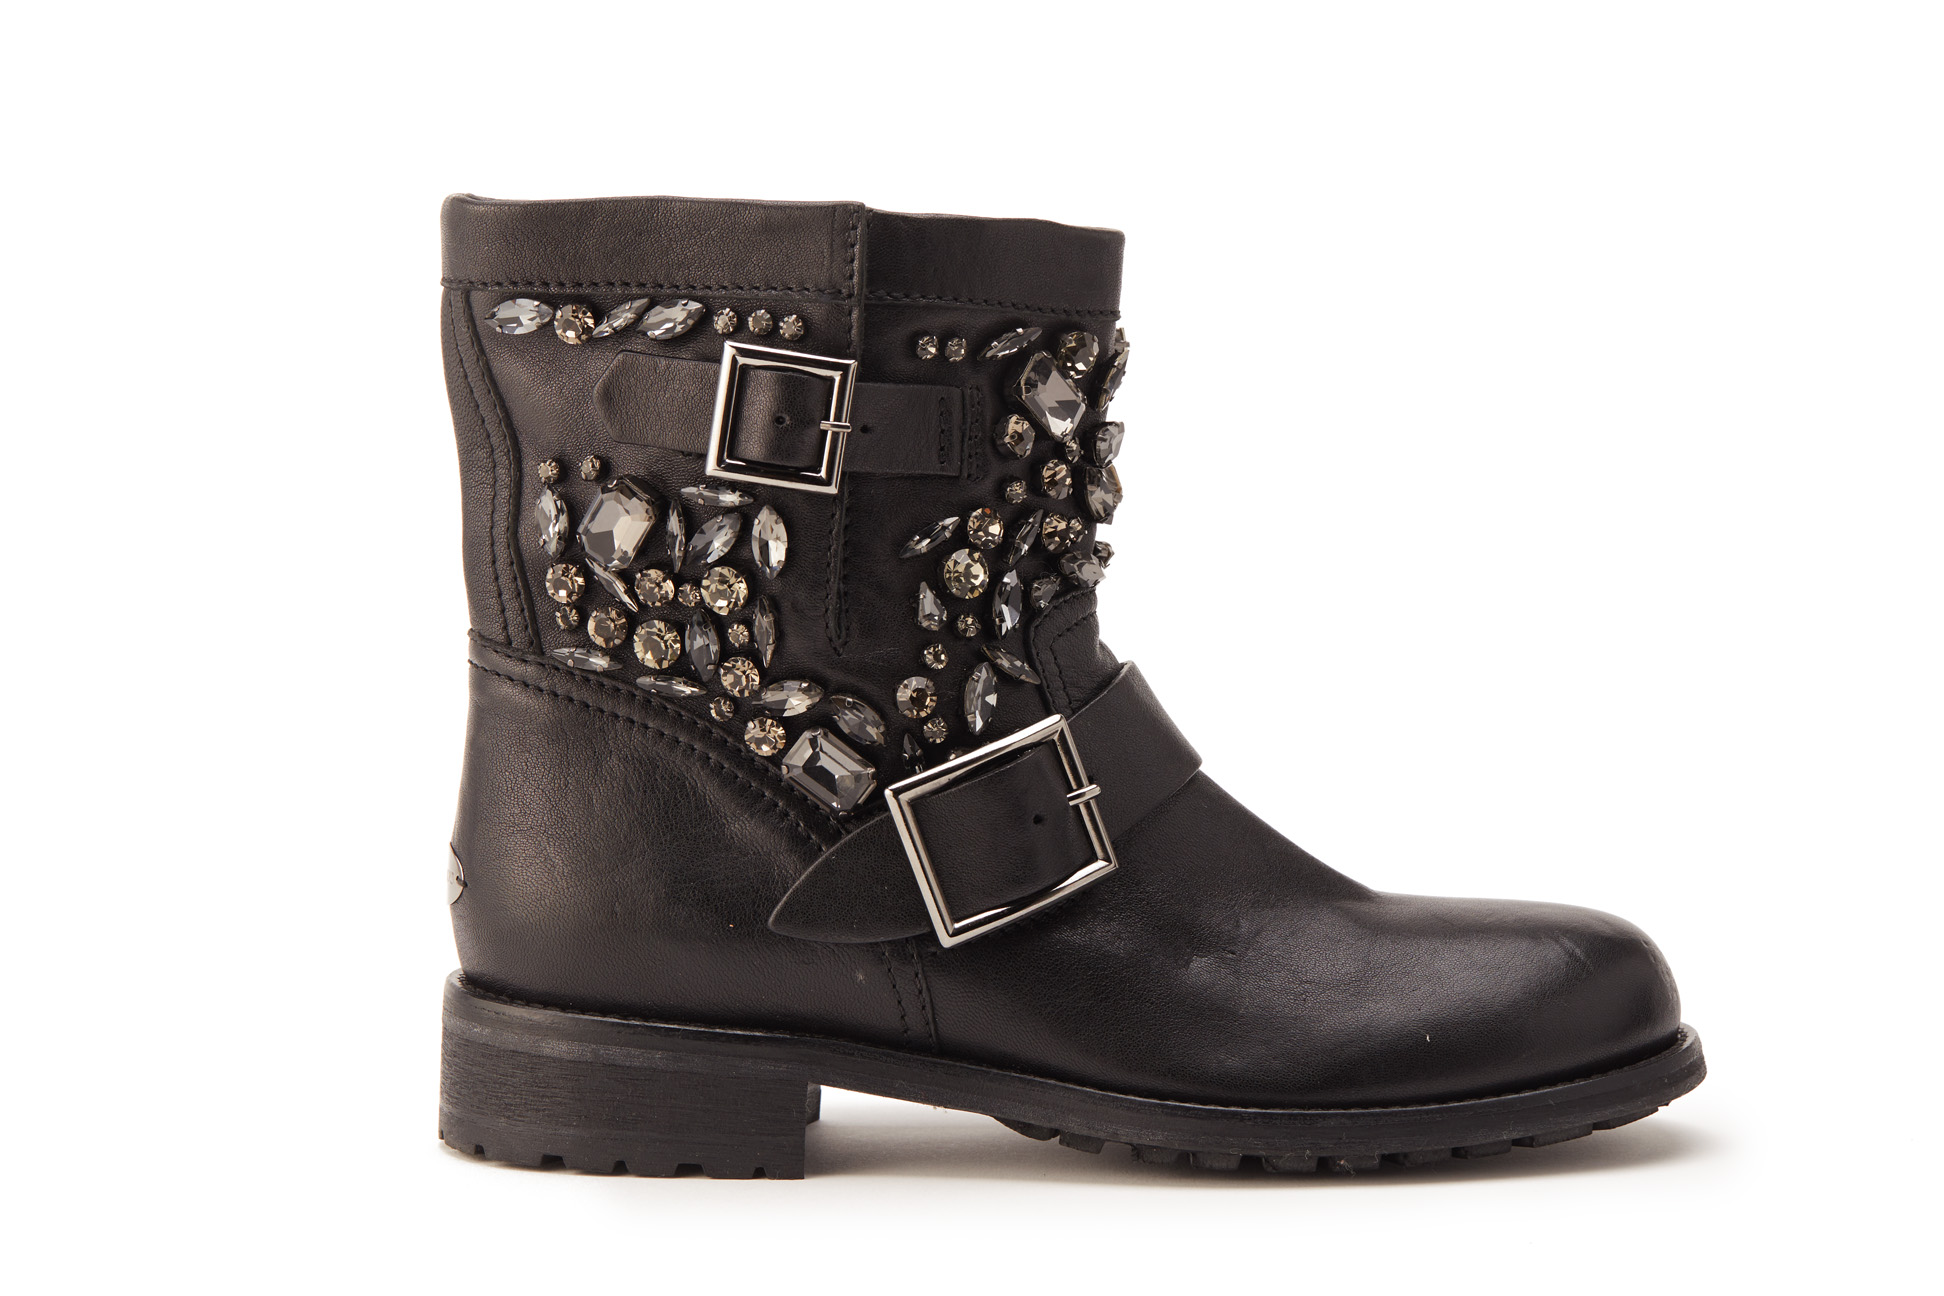 A PAIR OF JIMMY CHOO 'CRYSTAL YOUTH' BOOTS EU 38 - Image 2 of 4